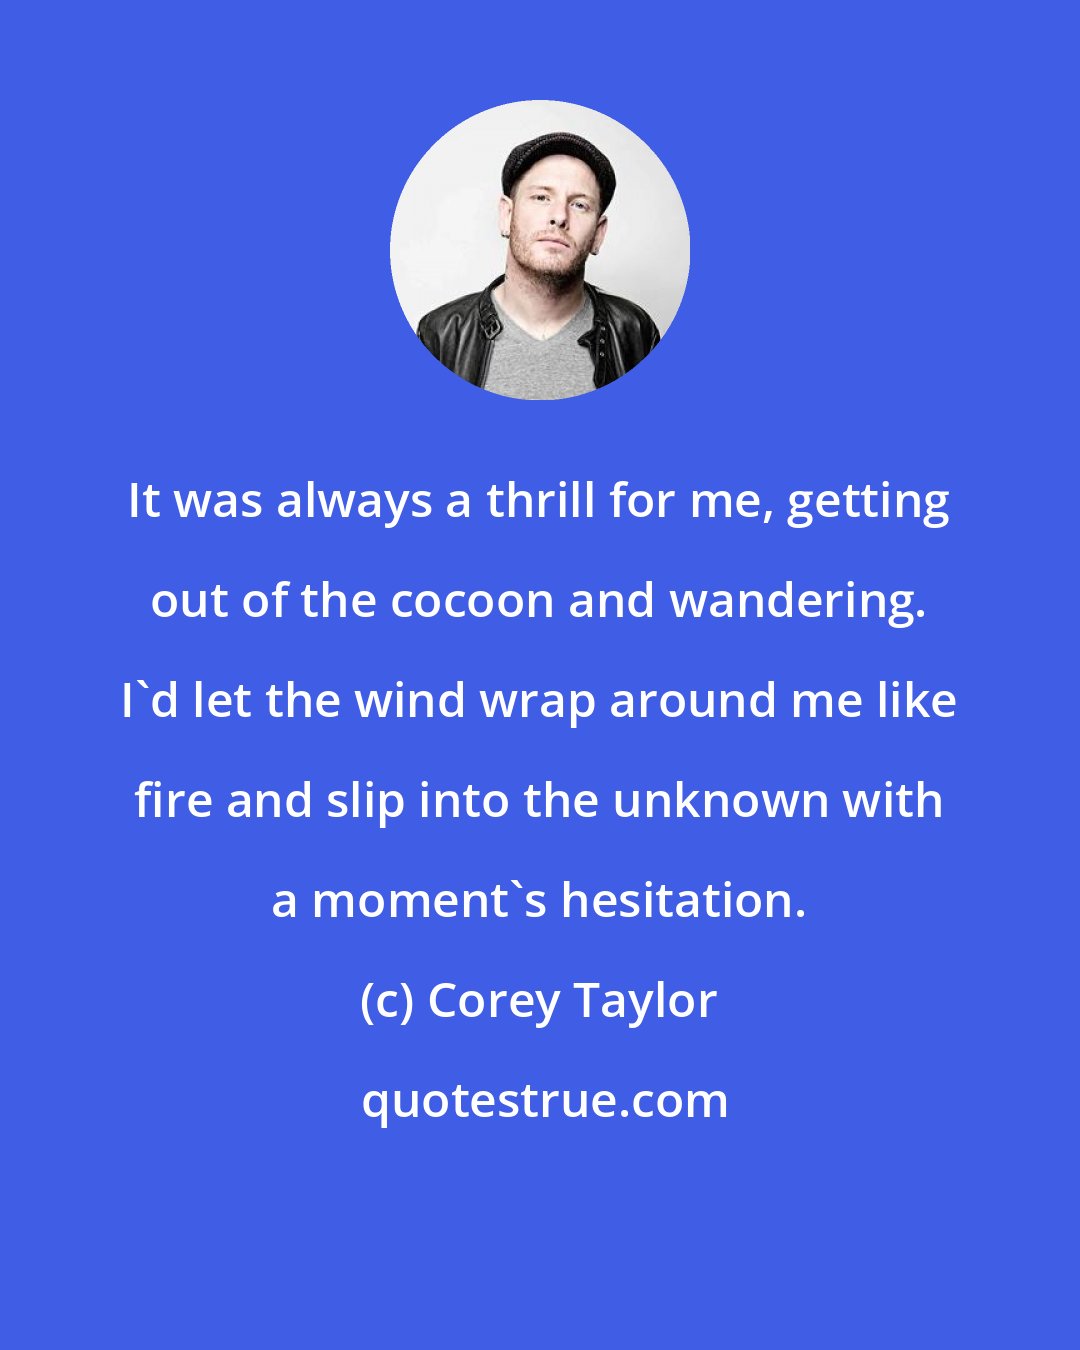 Corey Taylor: It was always a thrill for me, getting out of the cocoon and wandering. I'd let the wind wrap around me like fire and slip into the unknown with a moment's hesitation.